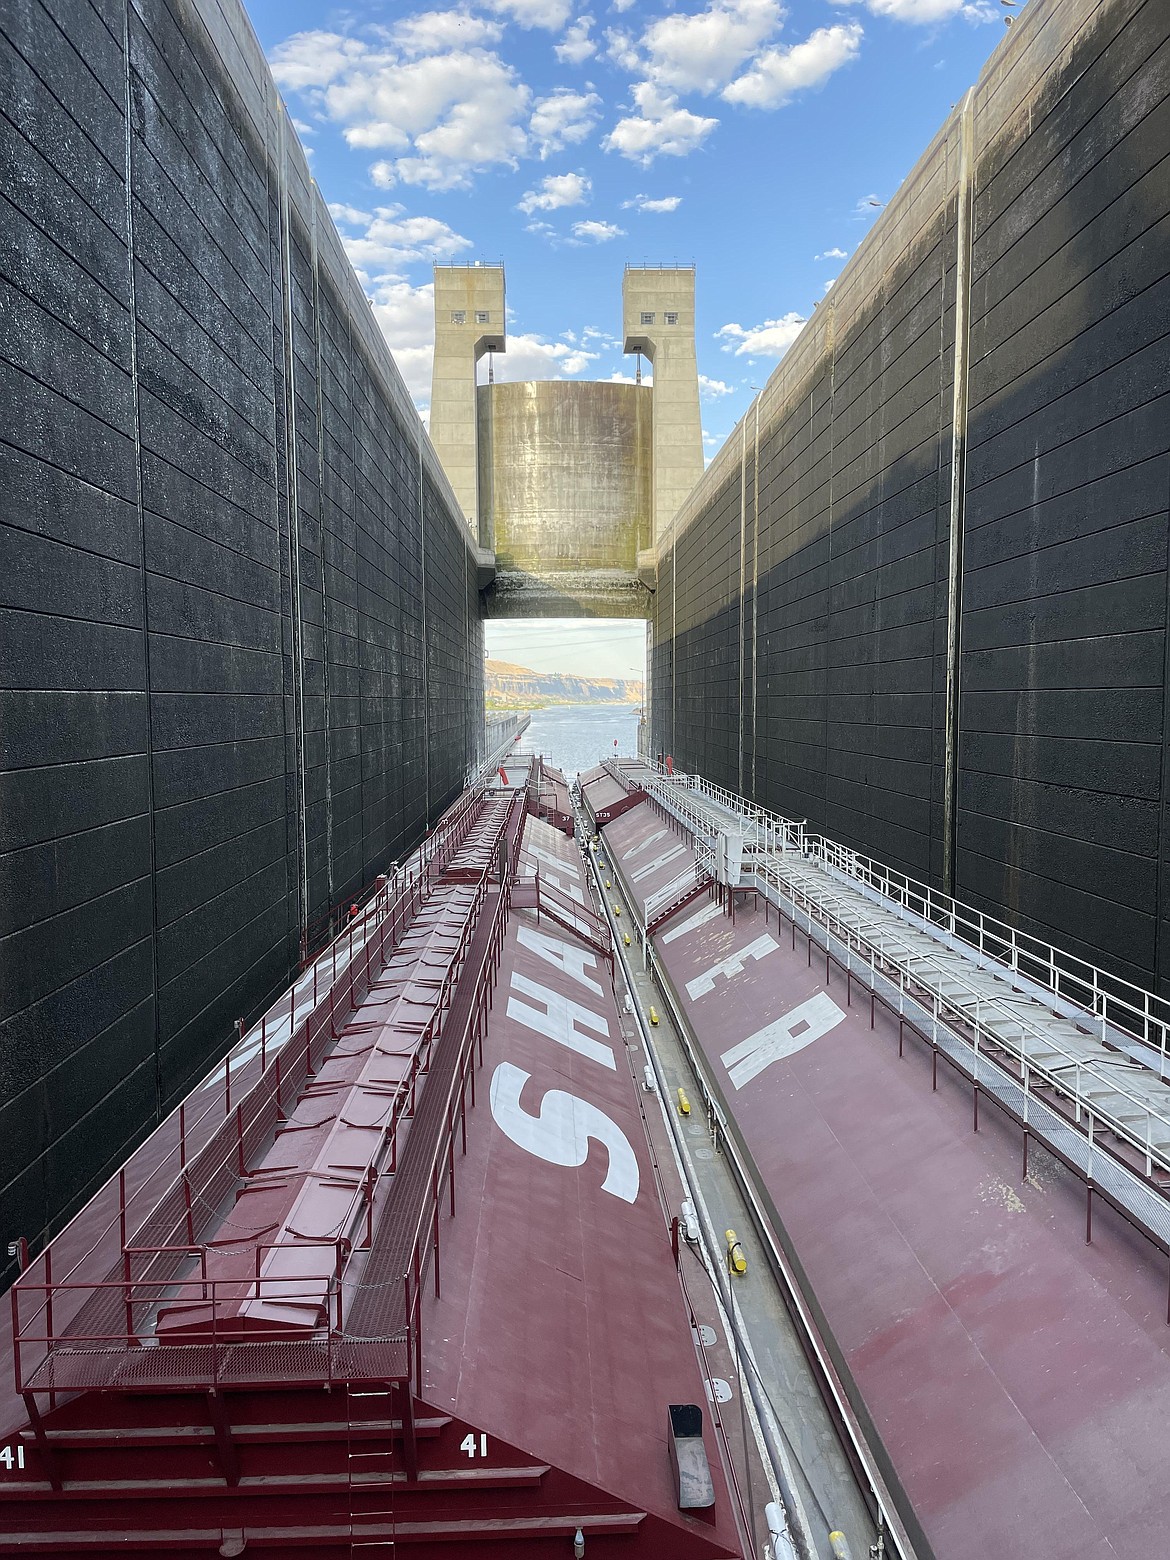 Inside the locks of the John Day Dam. It takes about 30 minutes for the tow — the name given to the assembly of tugboat and barges — to transit a dam lock going downstream.